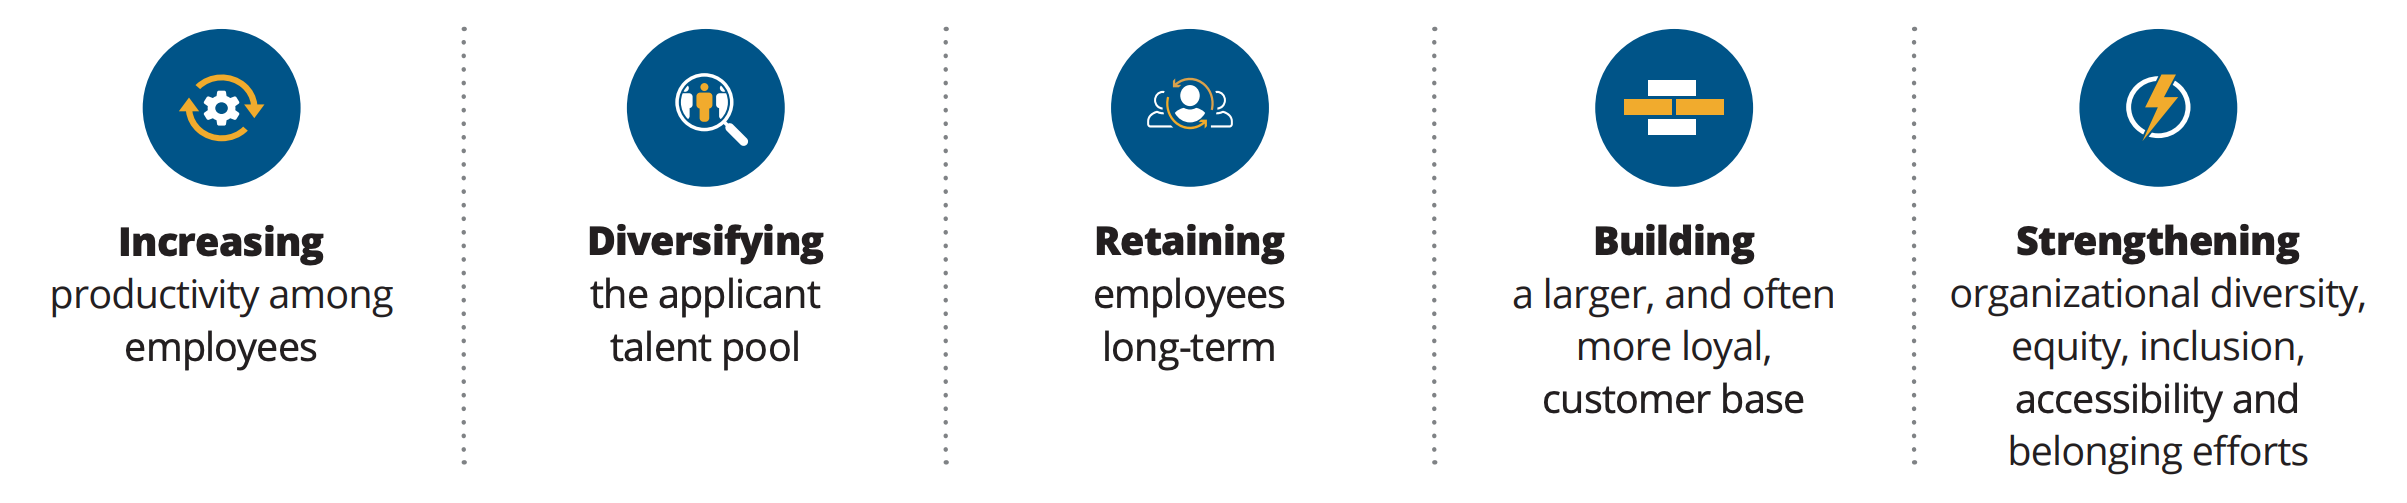 5 icons with text, left-right: Increasing productivity among employees; diversifying the applicant talent pool; retaining employees long-term; building a larger, and often more loyal, customer base; strengthening organizational diversity, equity, inclusion, accessibility, and belonging efforts.